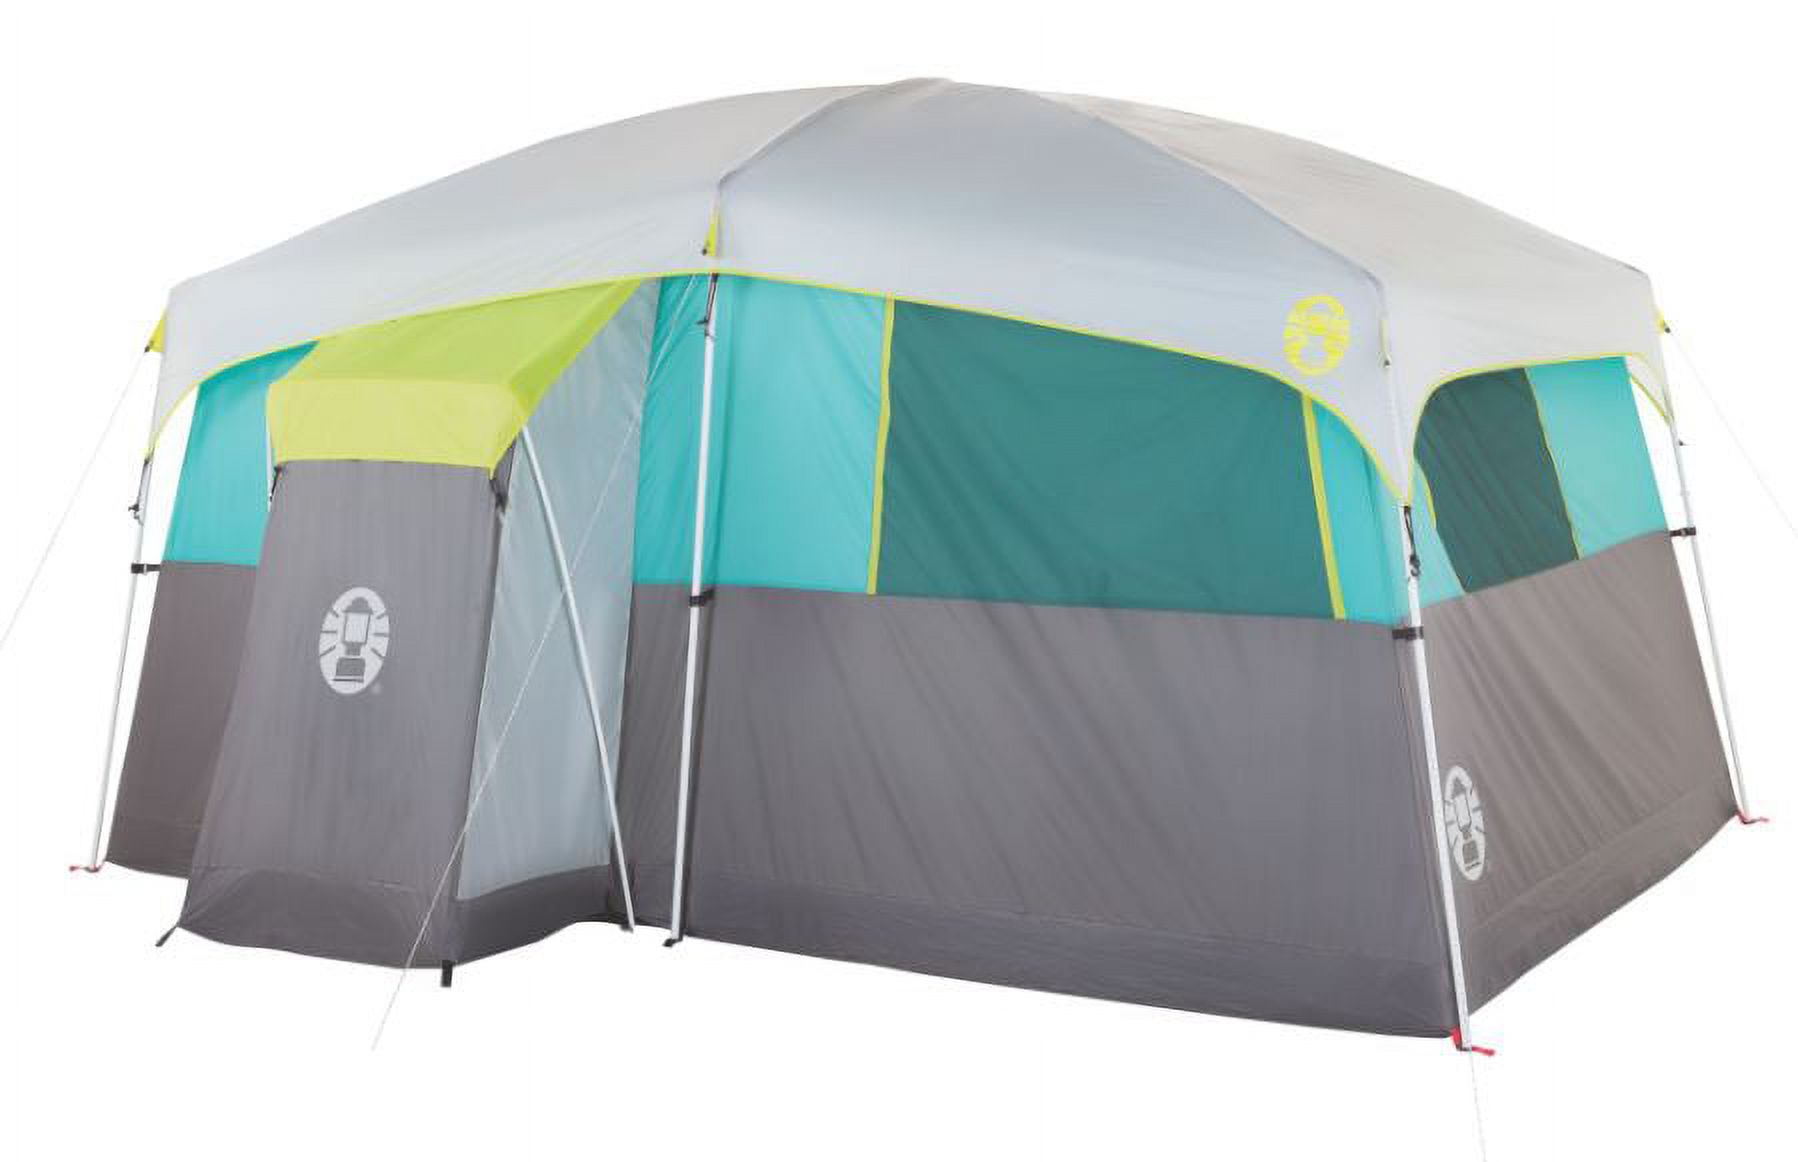 Coleman Tenaya Lake 8 Person Lighted Fast Pitch Cabin Tent, 1 Room, Teal - image 2 of 5